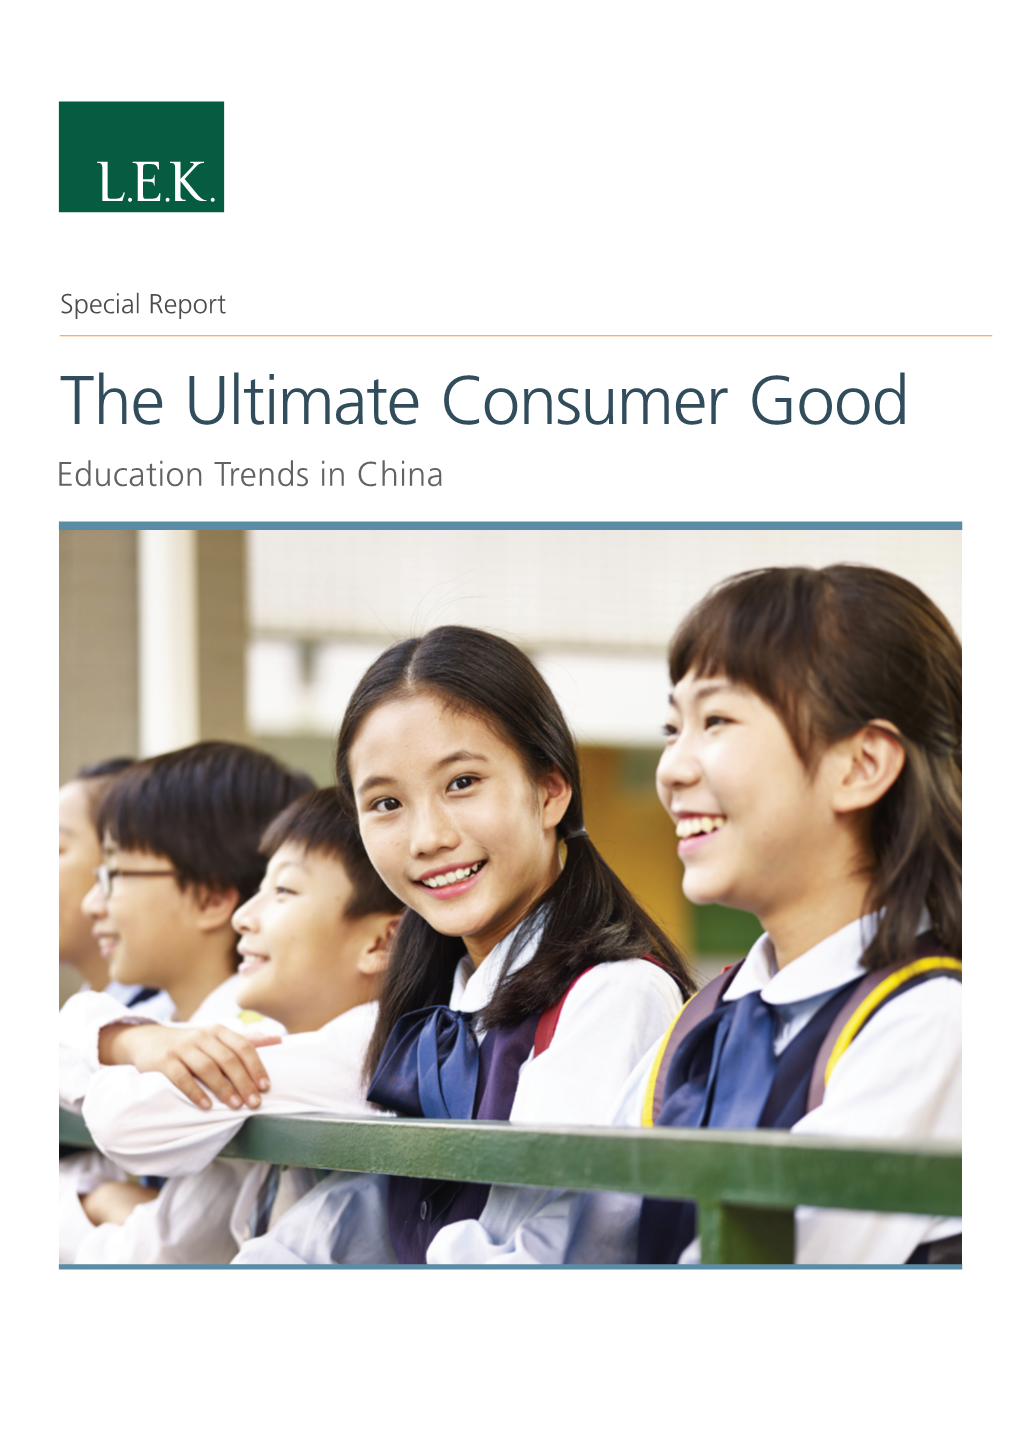 The Ultimate Consumer Good Education Trends in China Contents